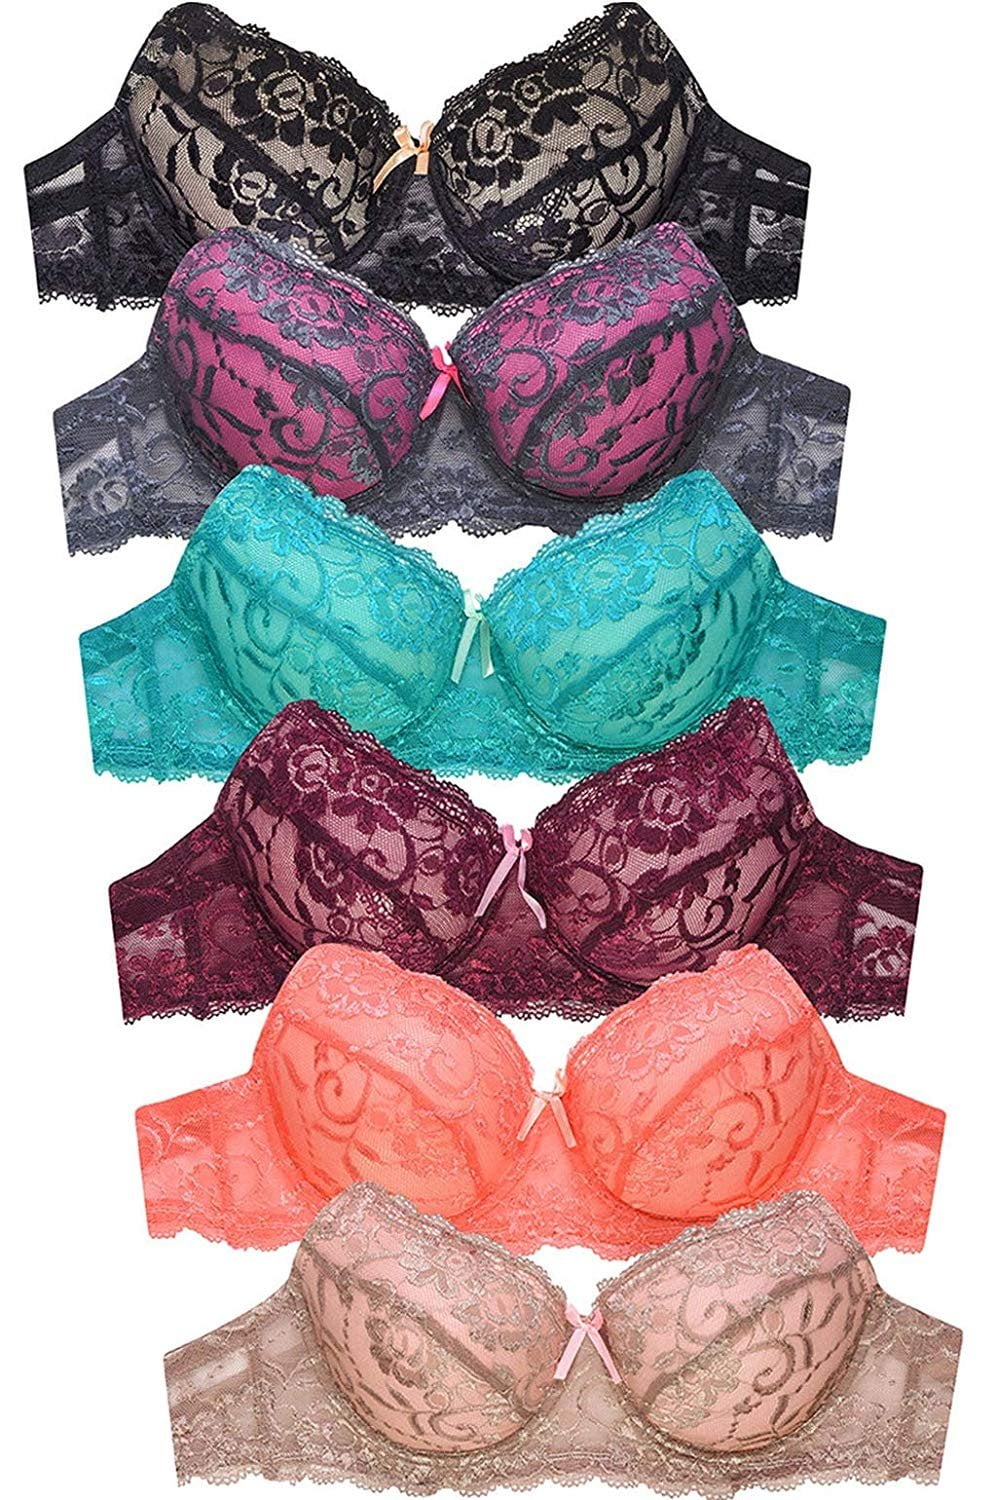 Wacoal 'Softly Styled' UW Bra (2 colors)~ 855301 - Knickers of